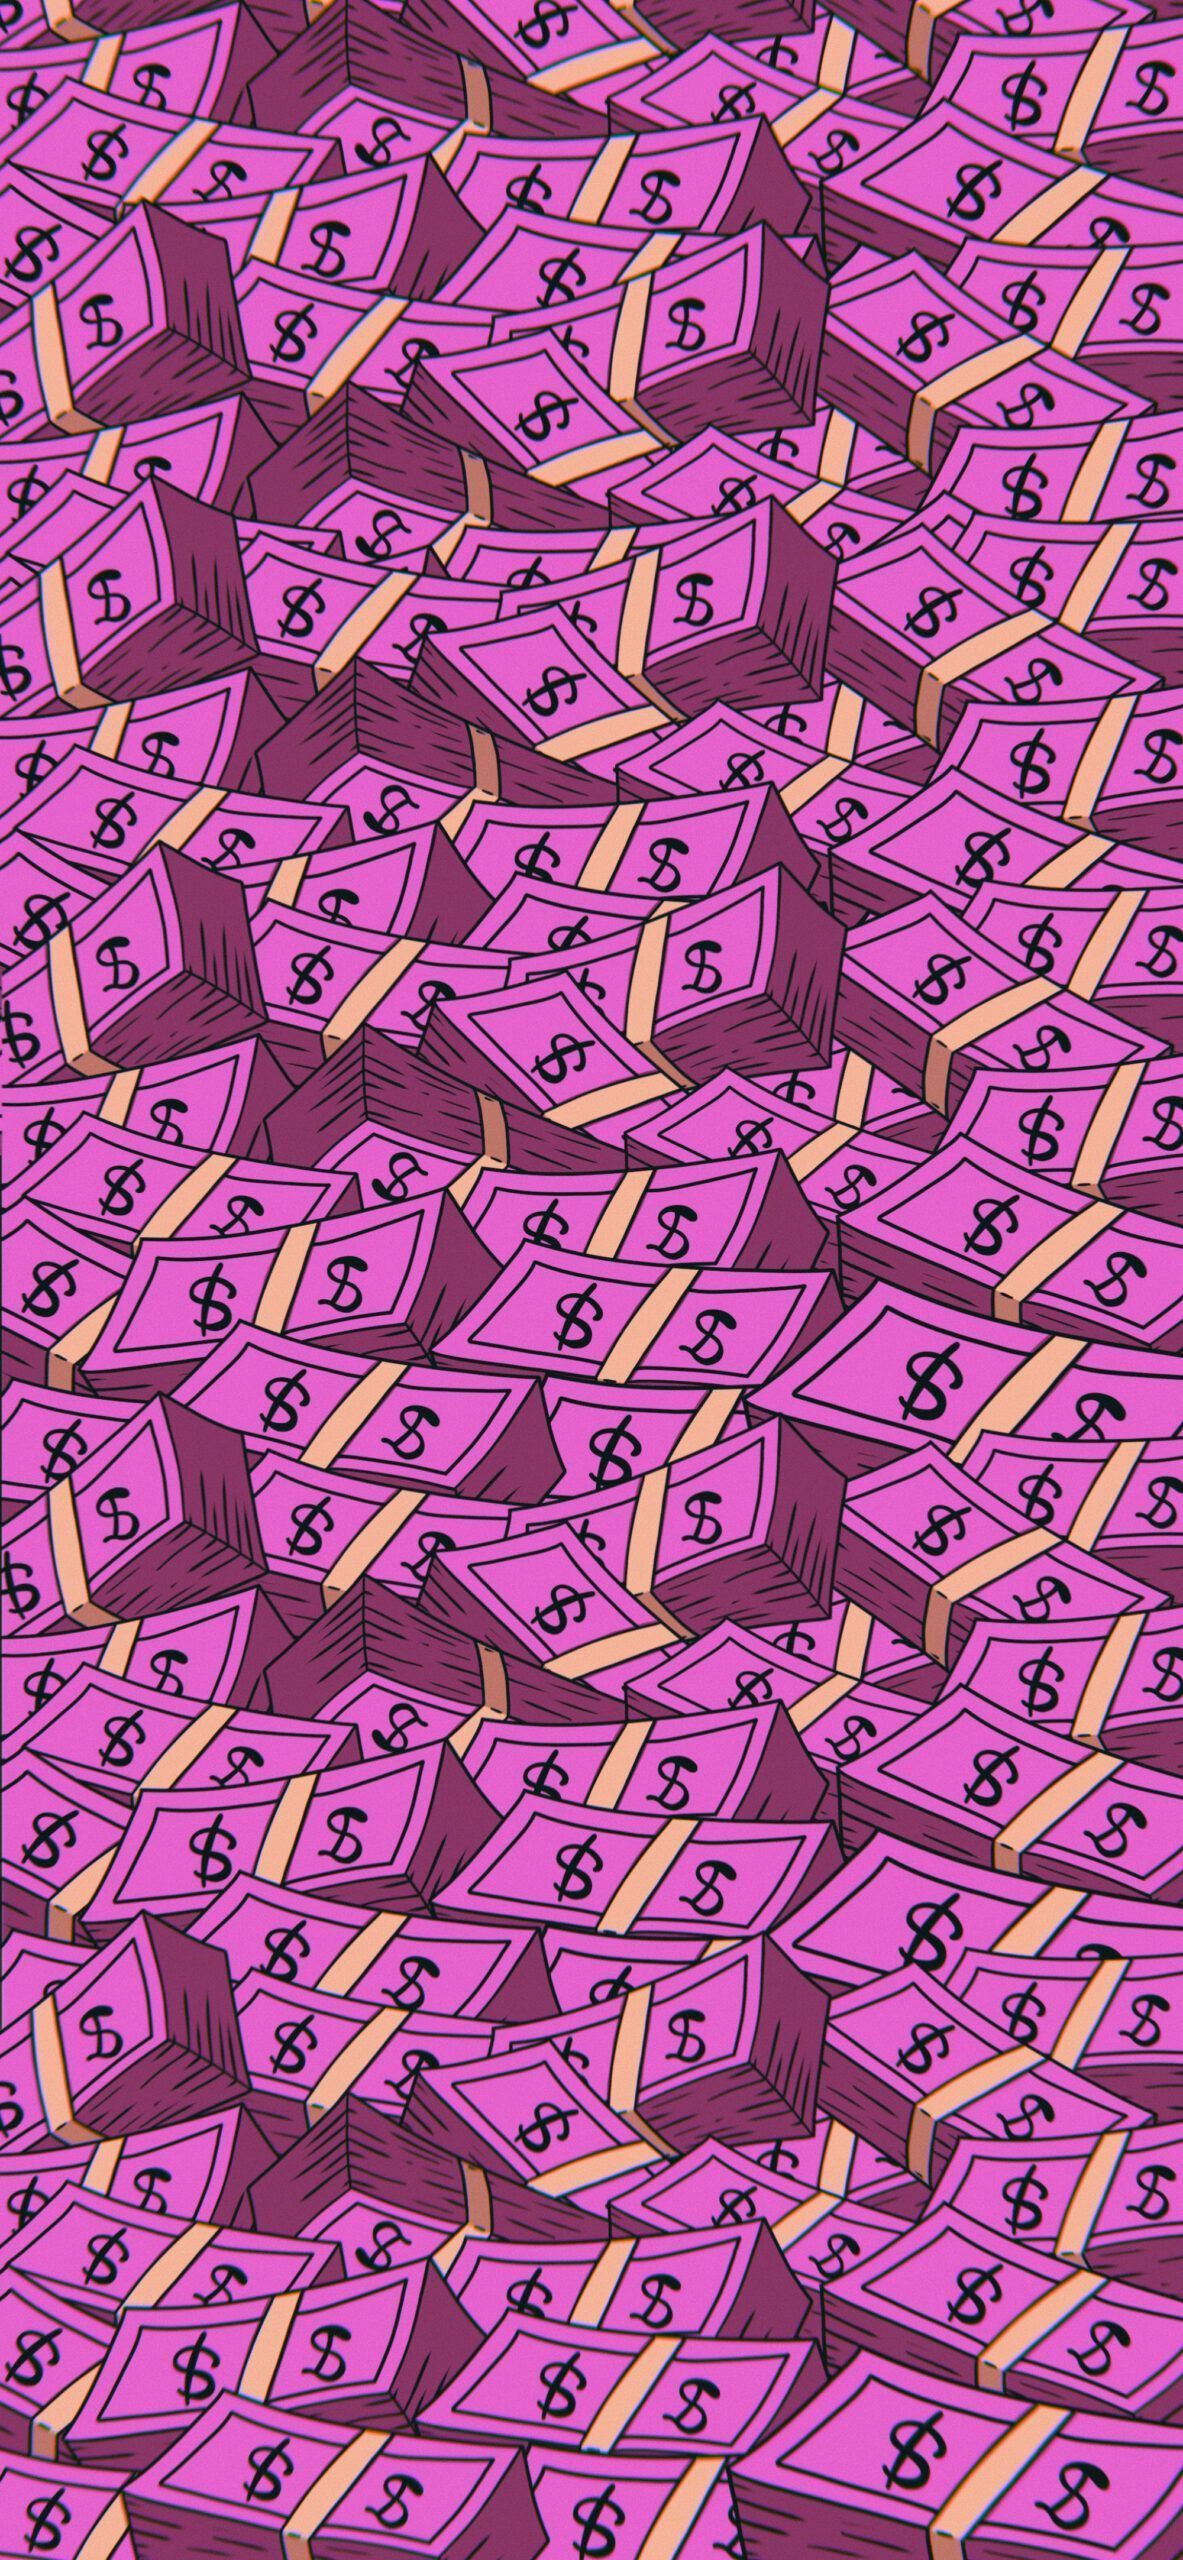 A pattern of pink and yellow money - Money